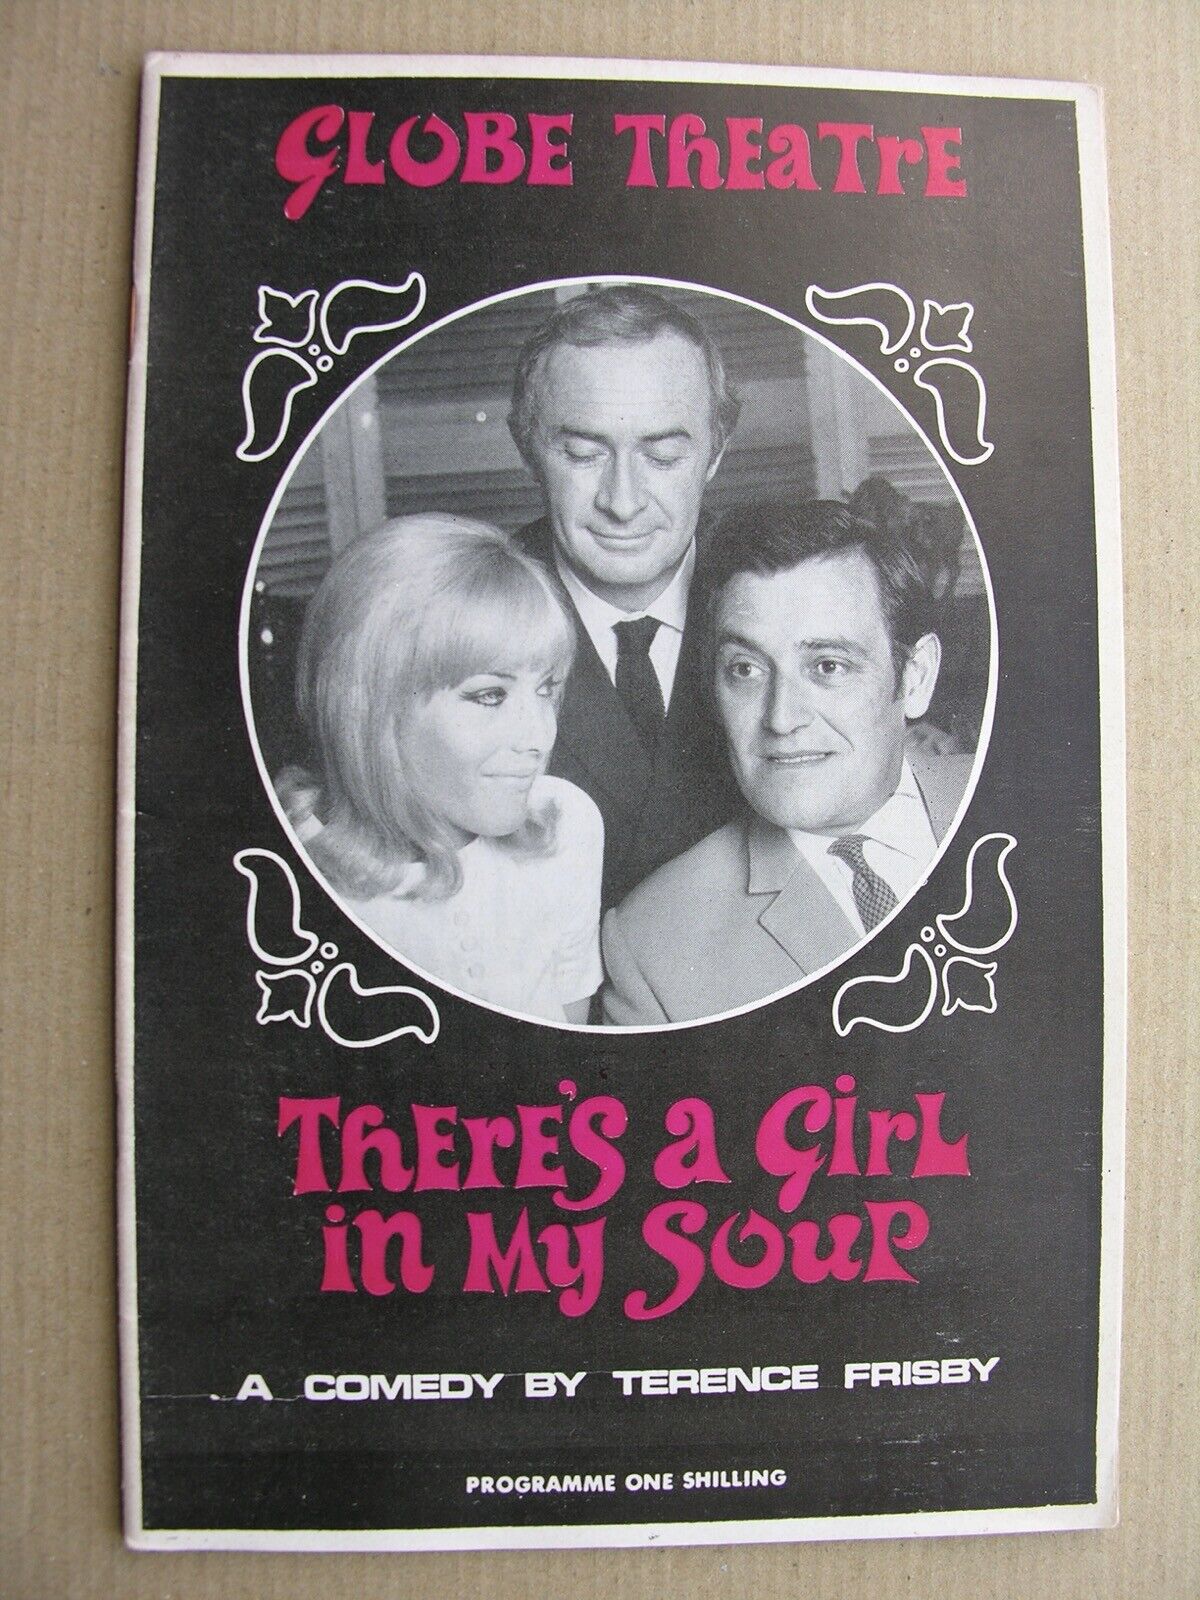 1967 THERE’S A GIRL IN MY SOUP John Hamill Gerald Flood Belinda Carroll, Frisby